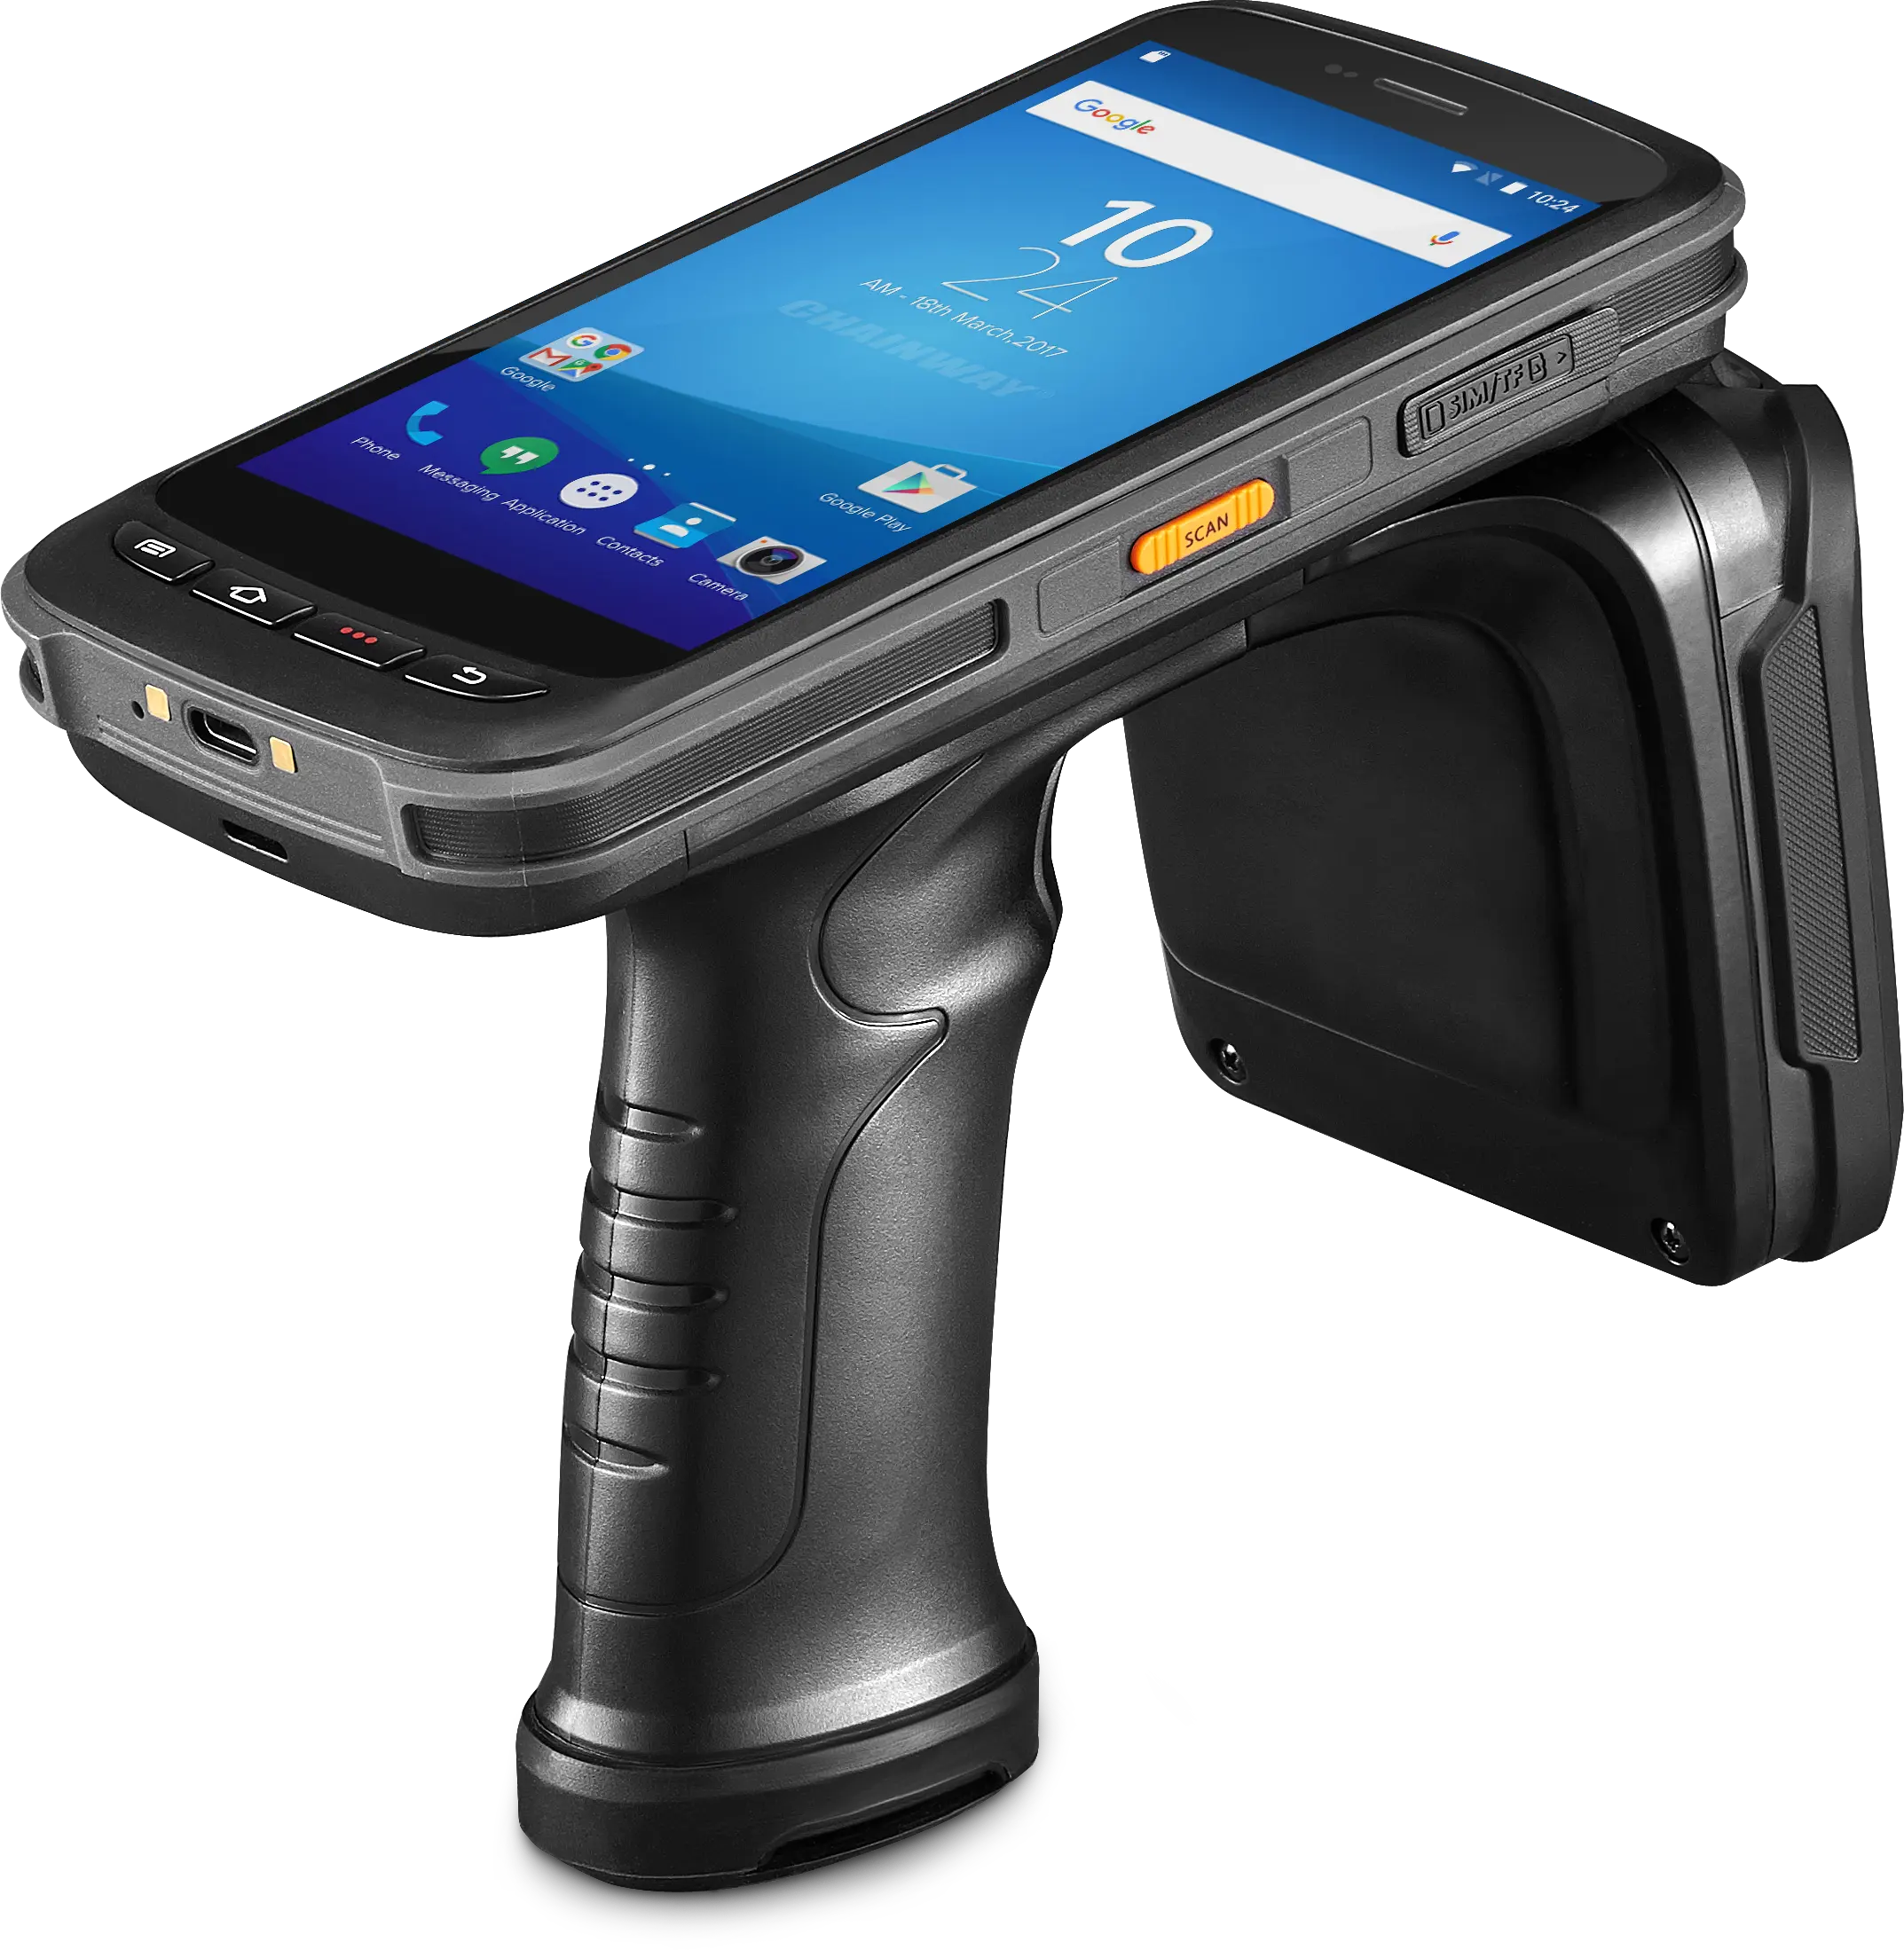 Hot Sell Chain way C72 android11 Handheld-Computer UHF-RFID-Lesegerät Barcode-Scanner